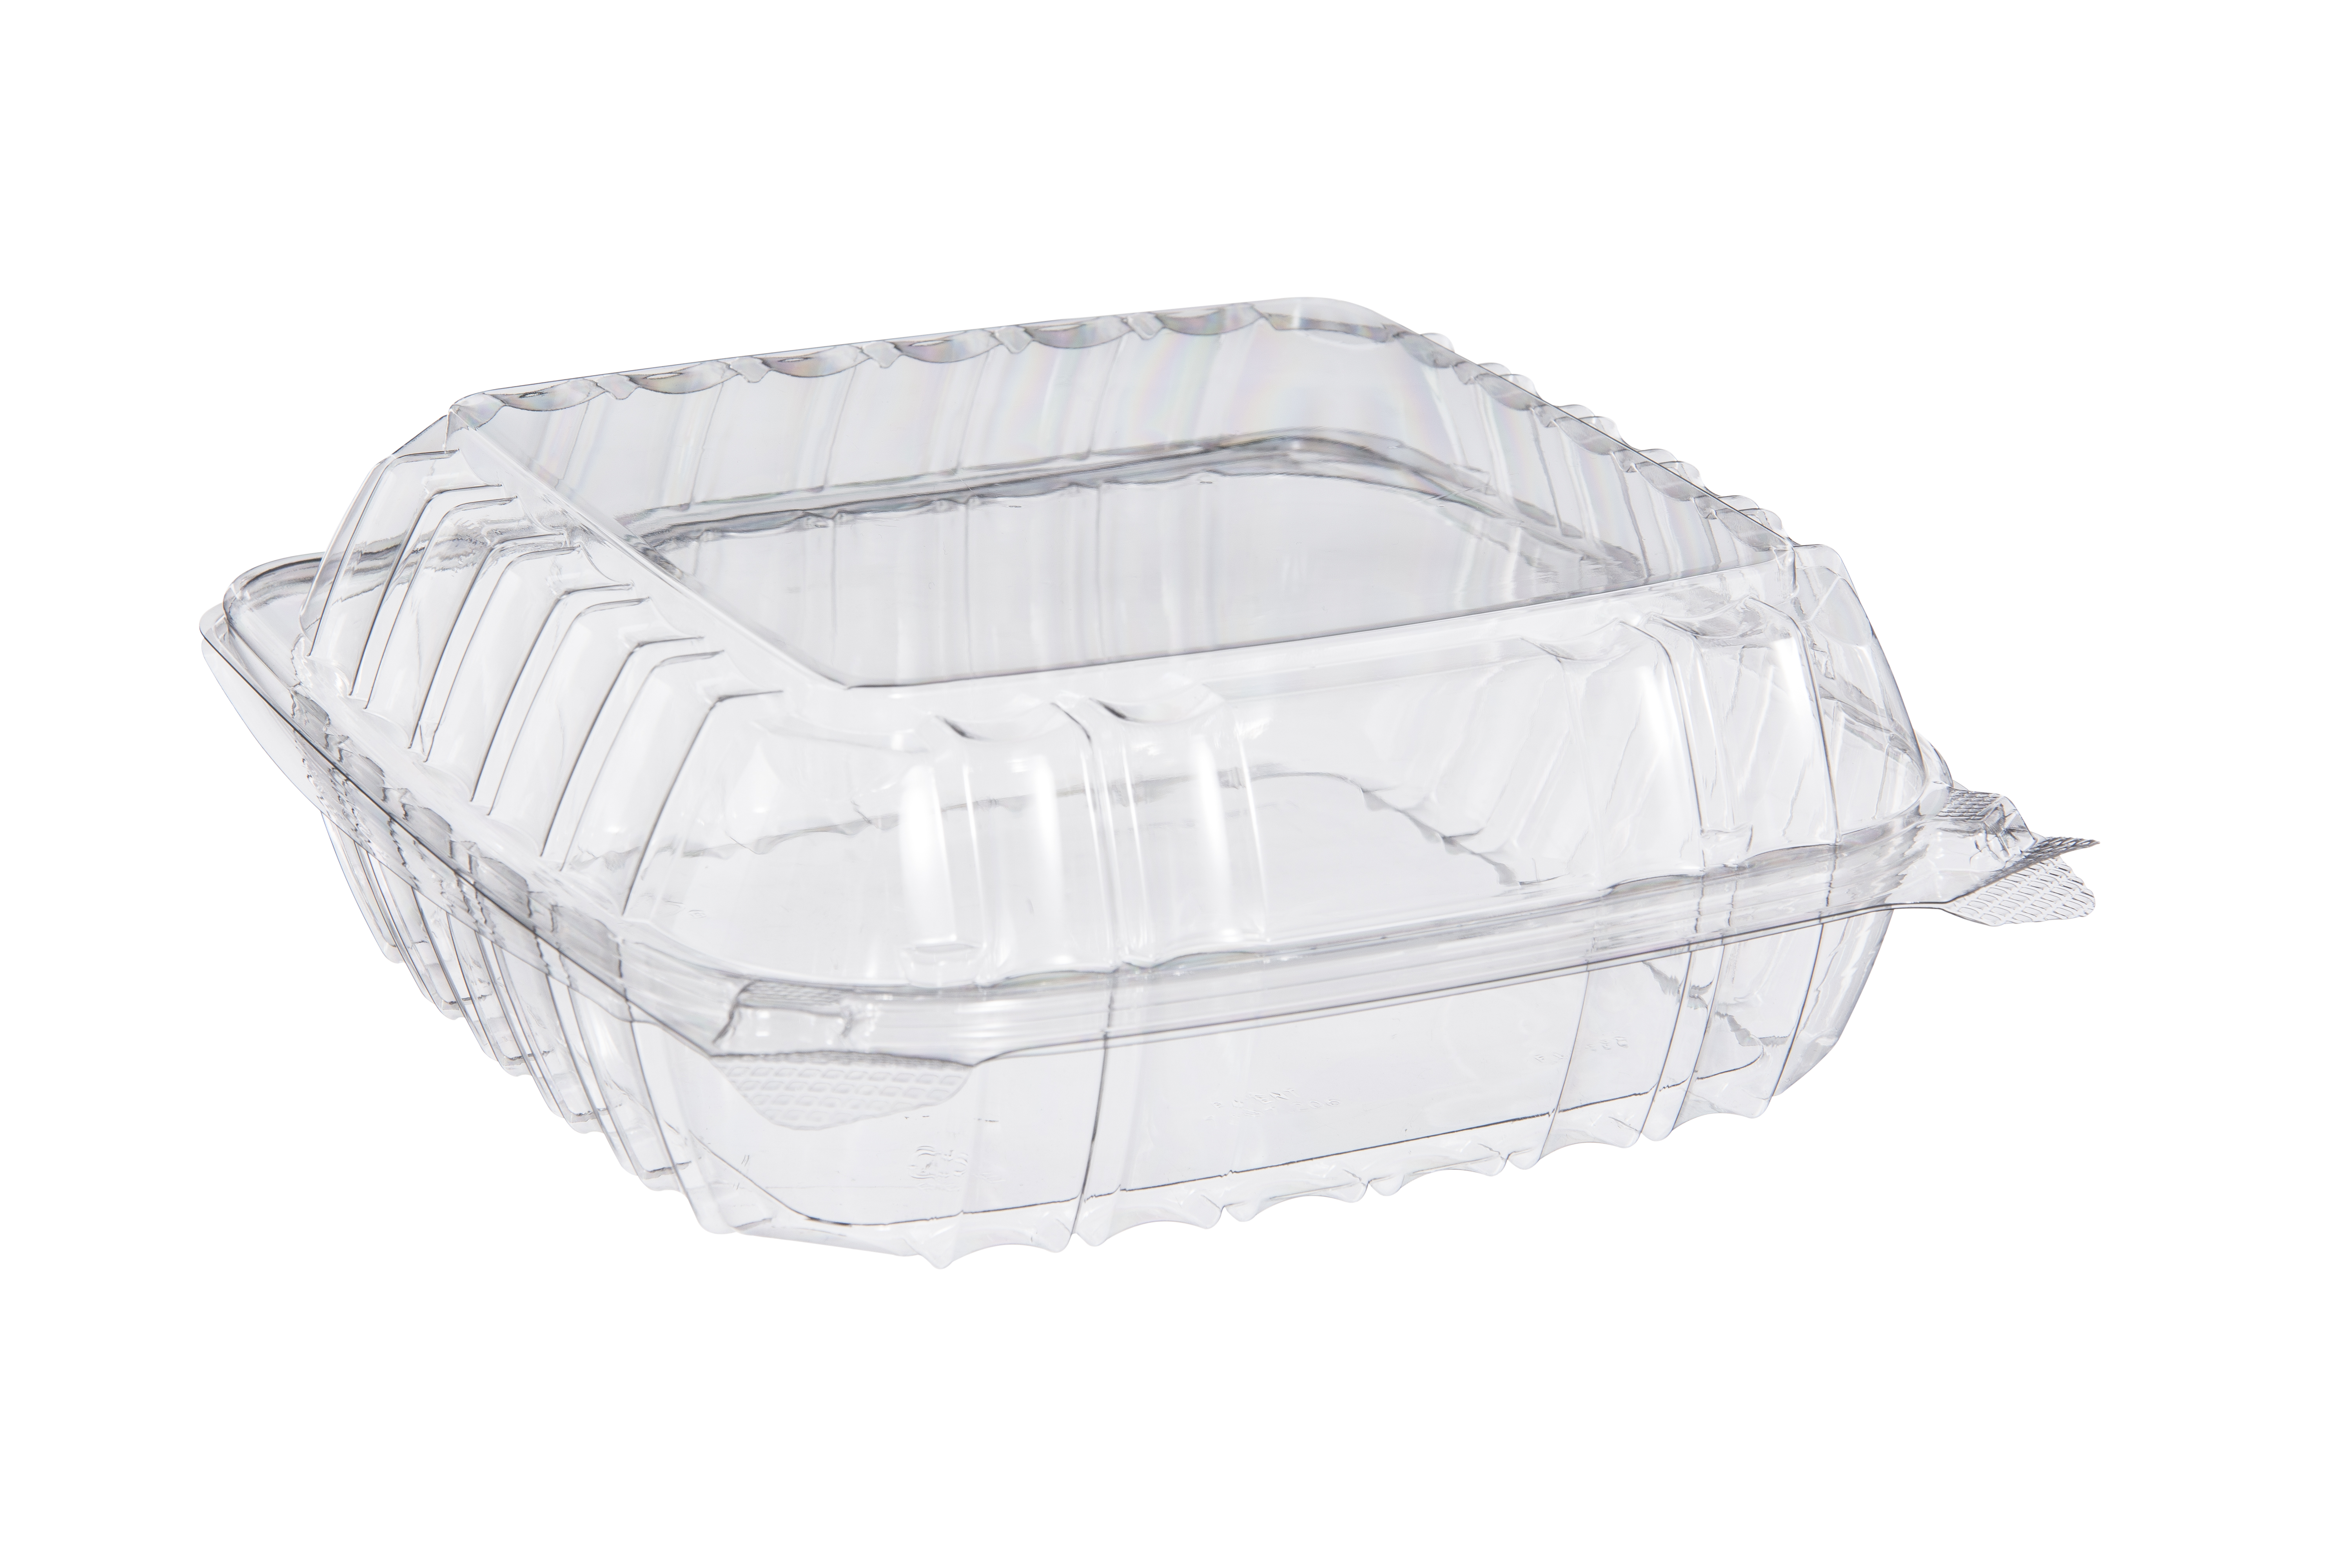 PicturesLogo/FOOD CONTAINERS LIDS CLEAR.jpg